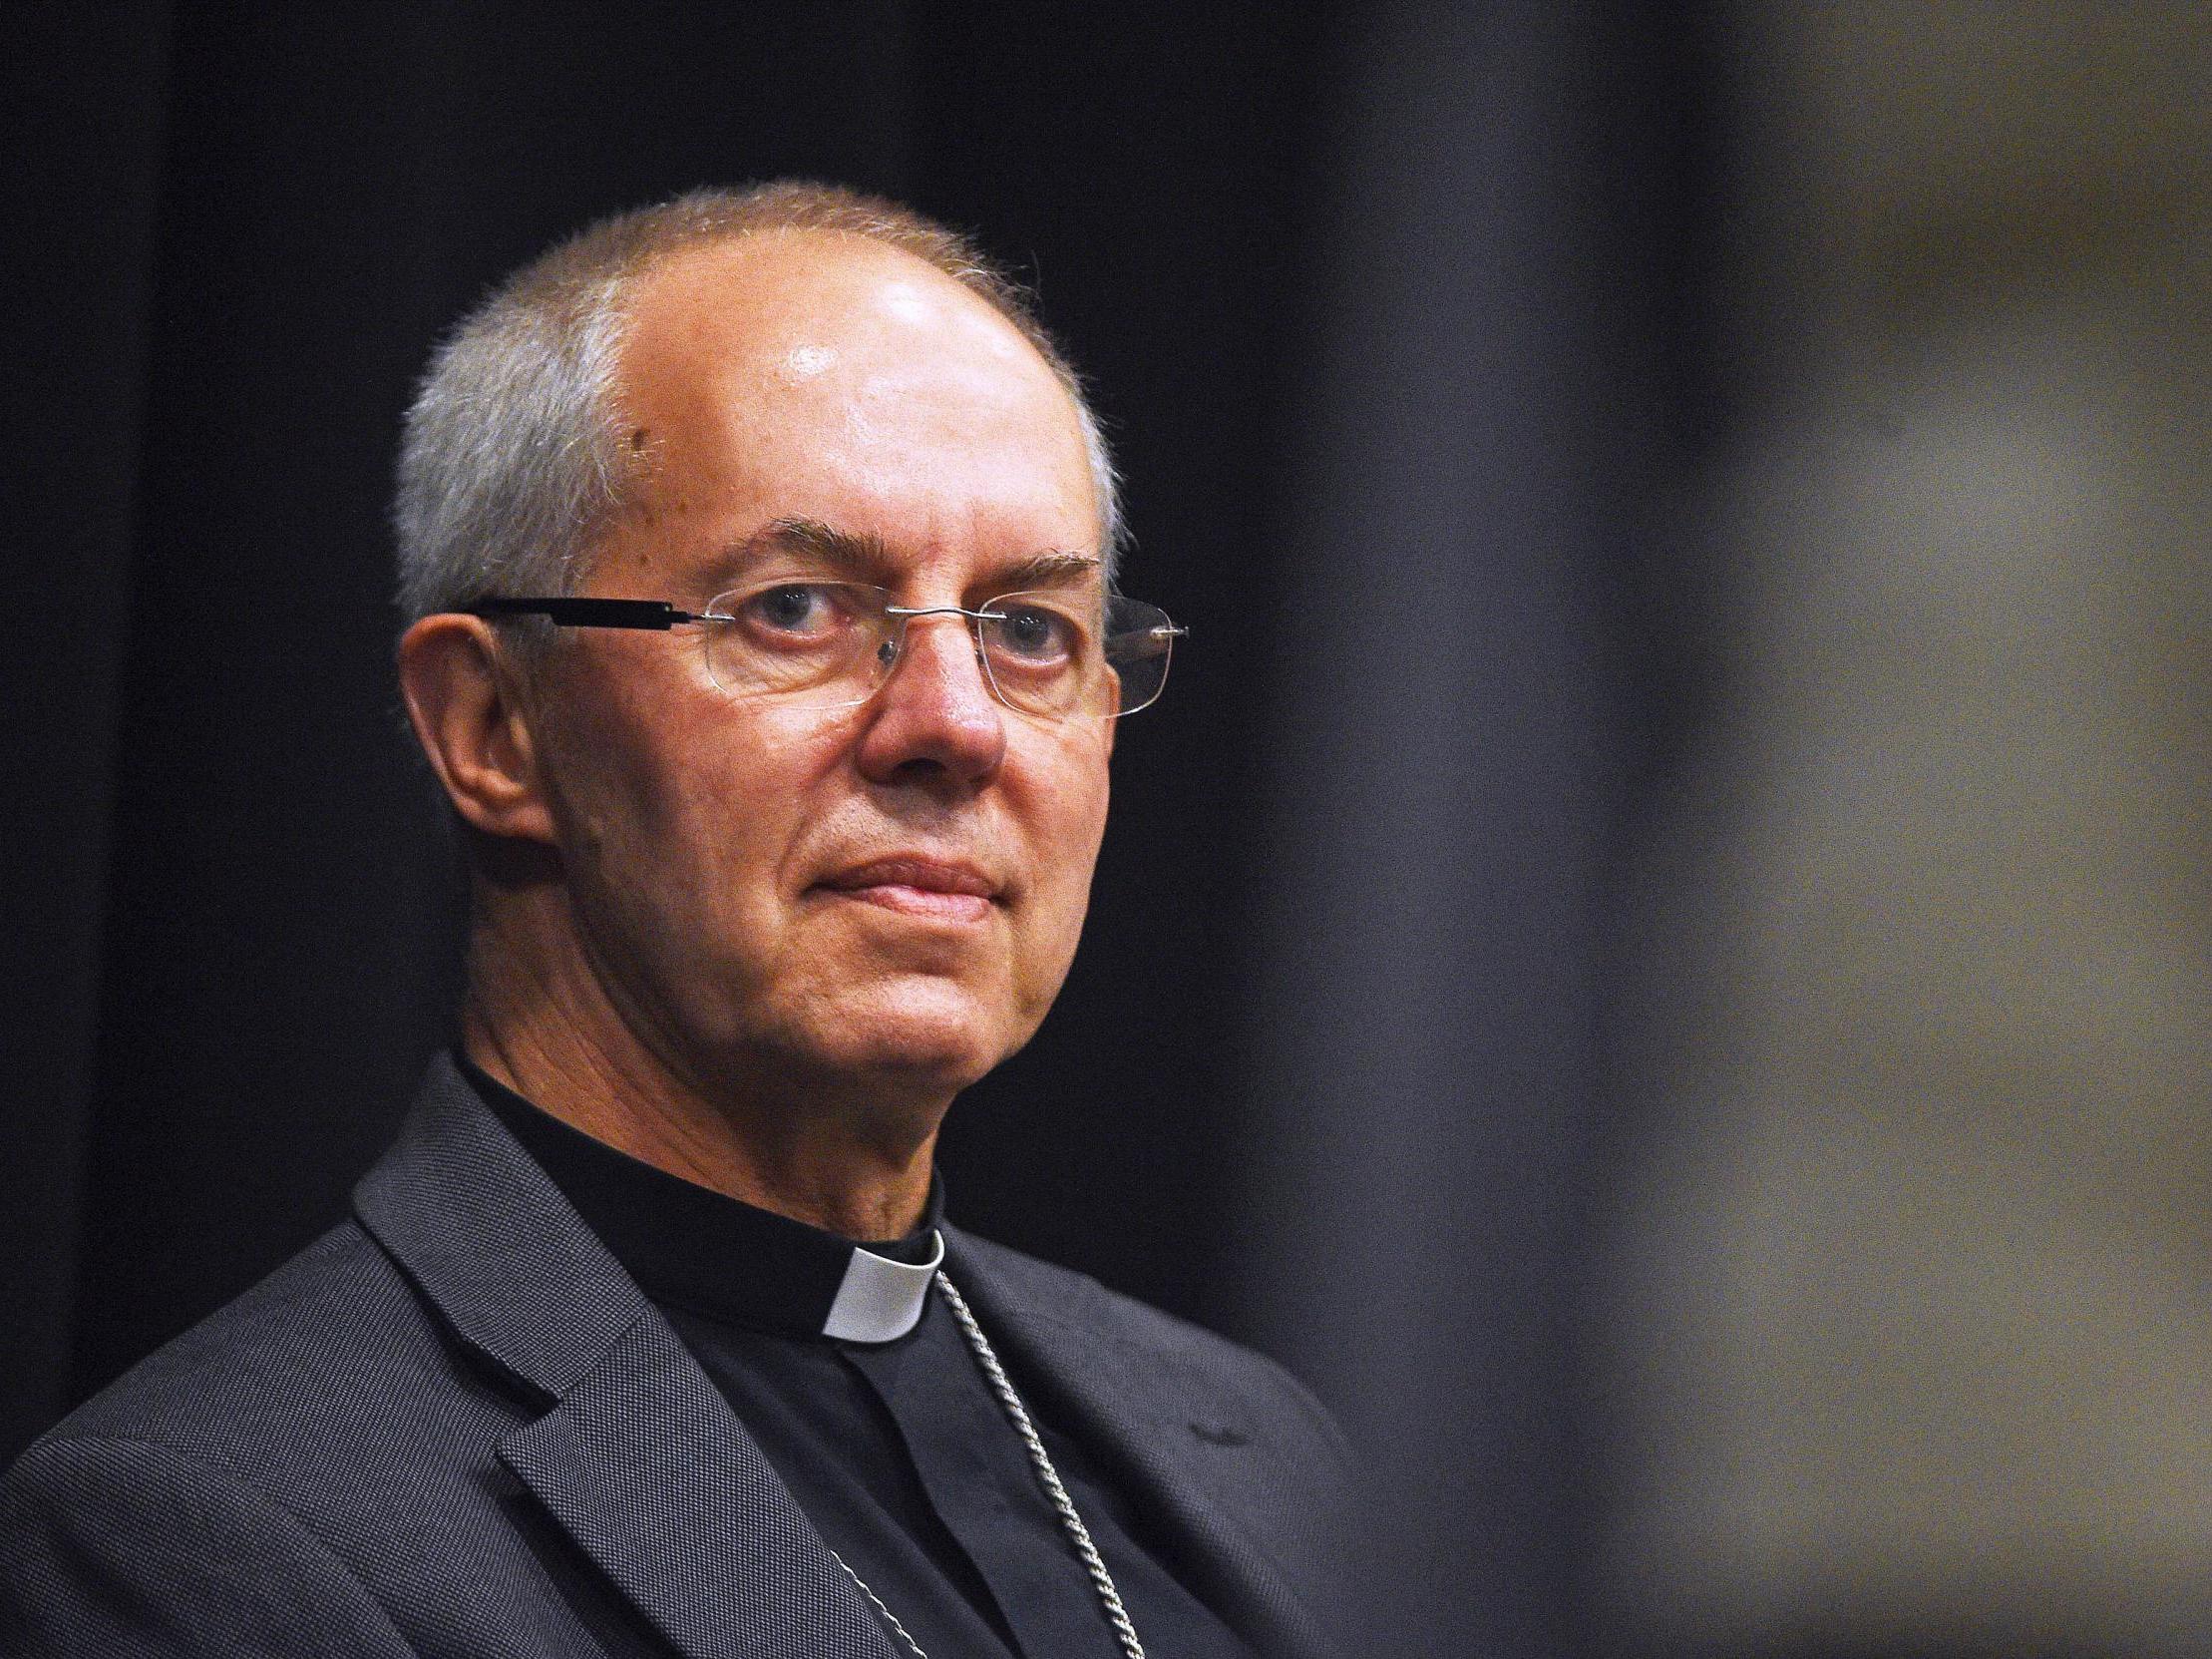 Justin Welby said the church remains "deeply institutionally racist", in a speech made as the General Synod unanimously backed a motion to "lament" and apologise for both conscious and unconscious racism